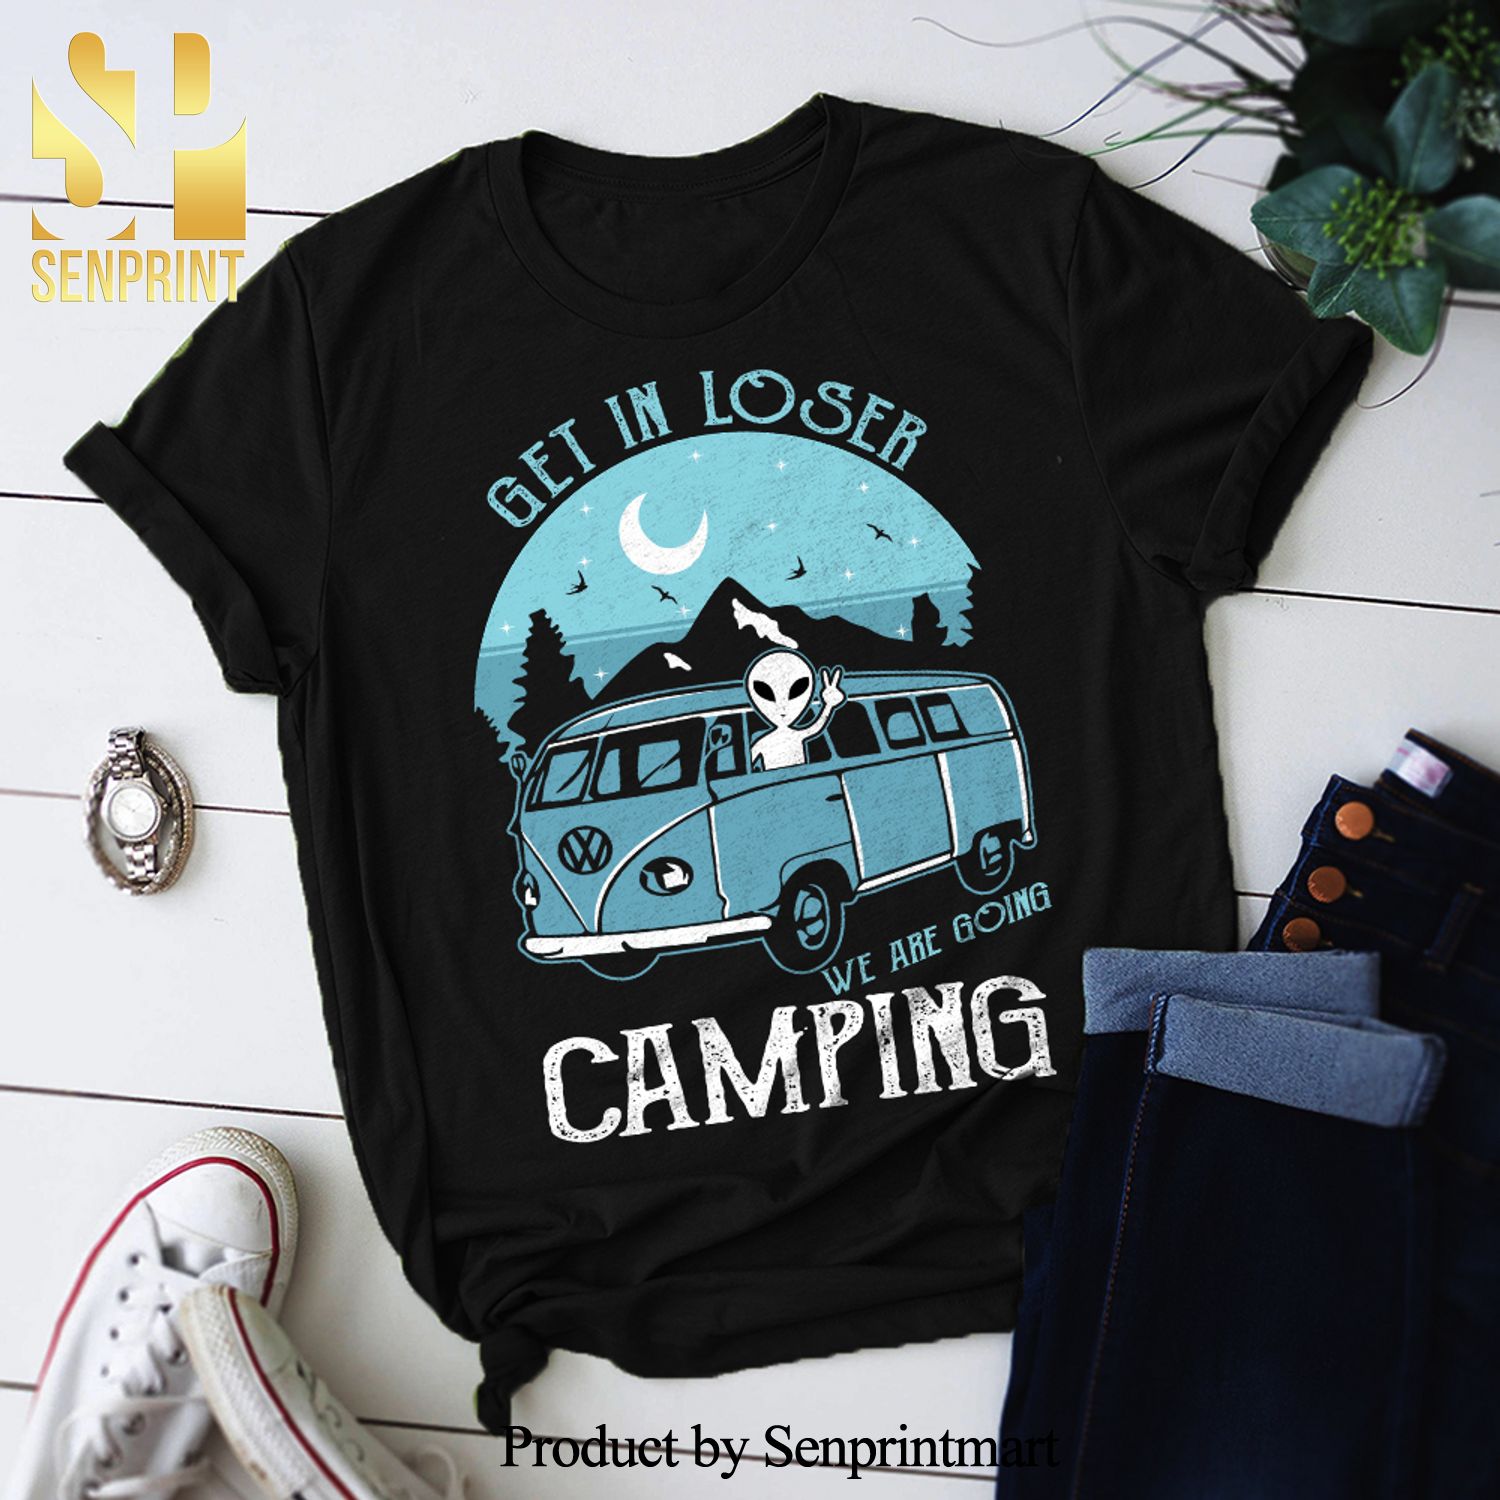 Get In Loser We Are Going Camping Alien Camping Classic Full Printed Shirt